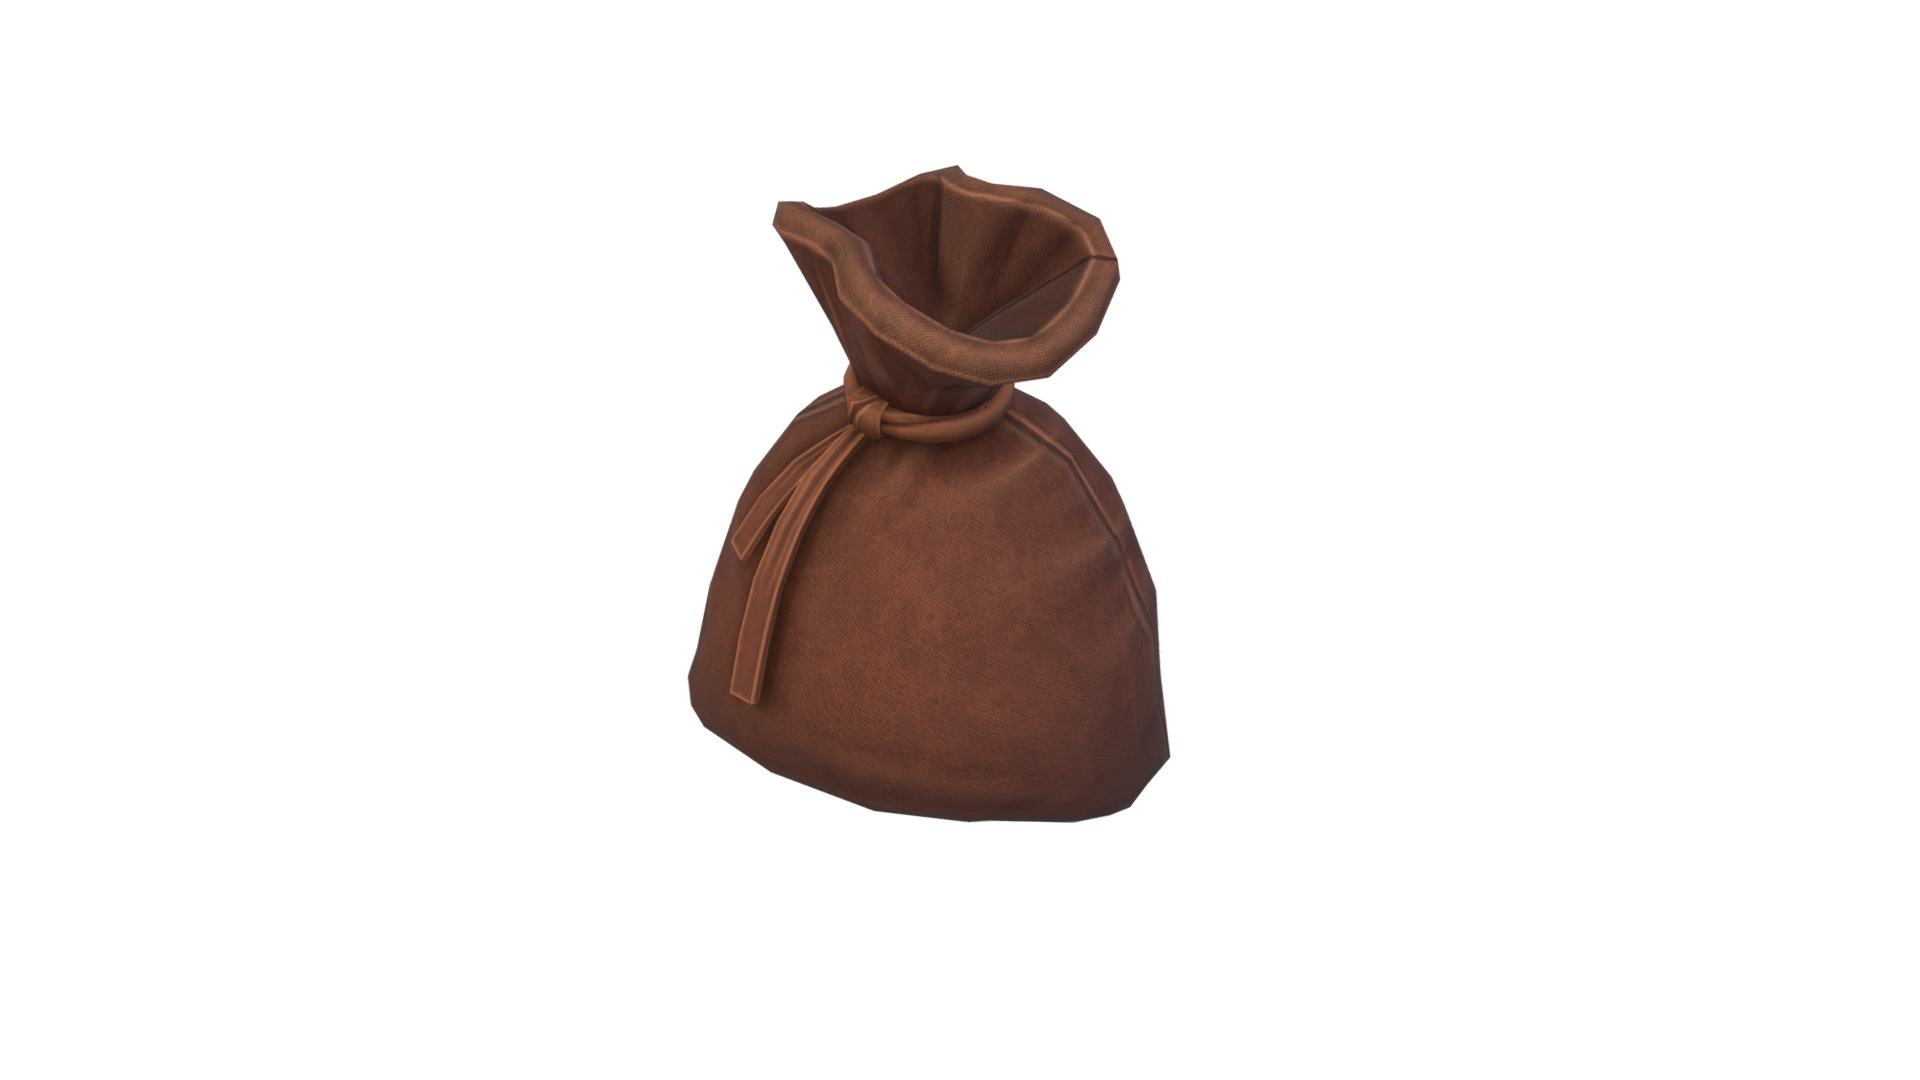 3D model Sack - This is a 3D model of the Sack. The 3D model is about a brown leather bag.